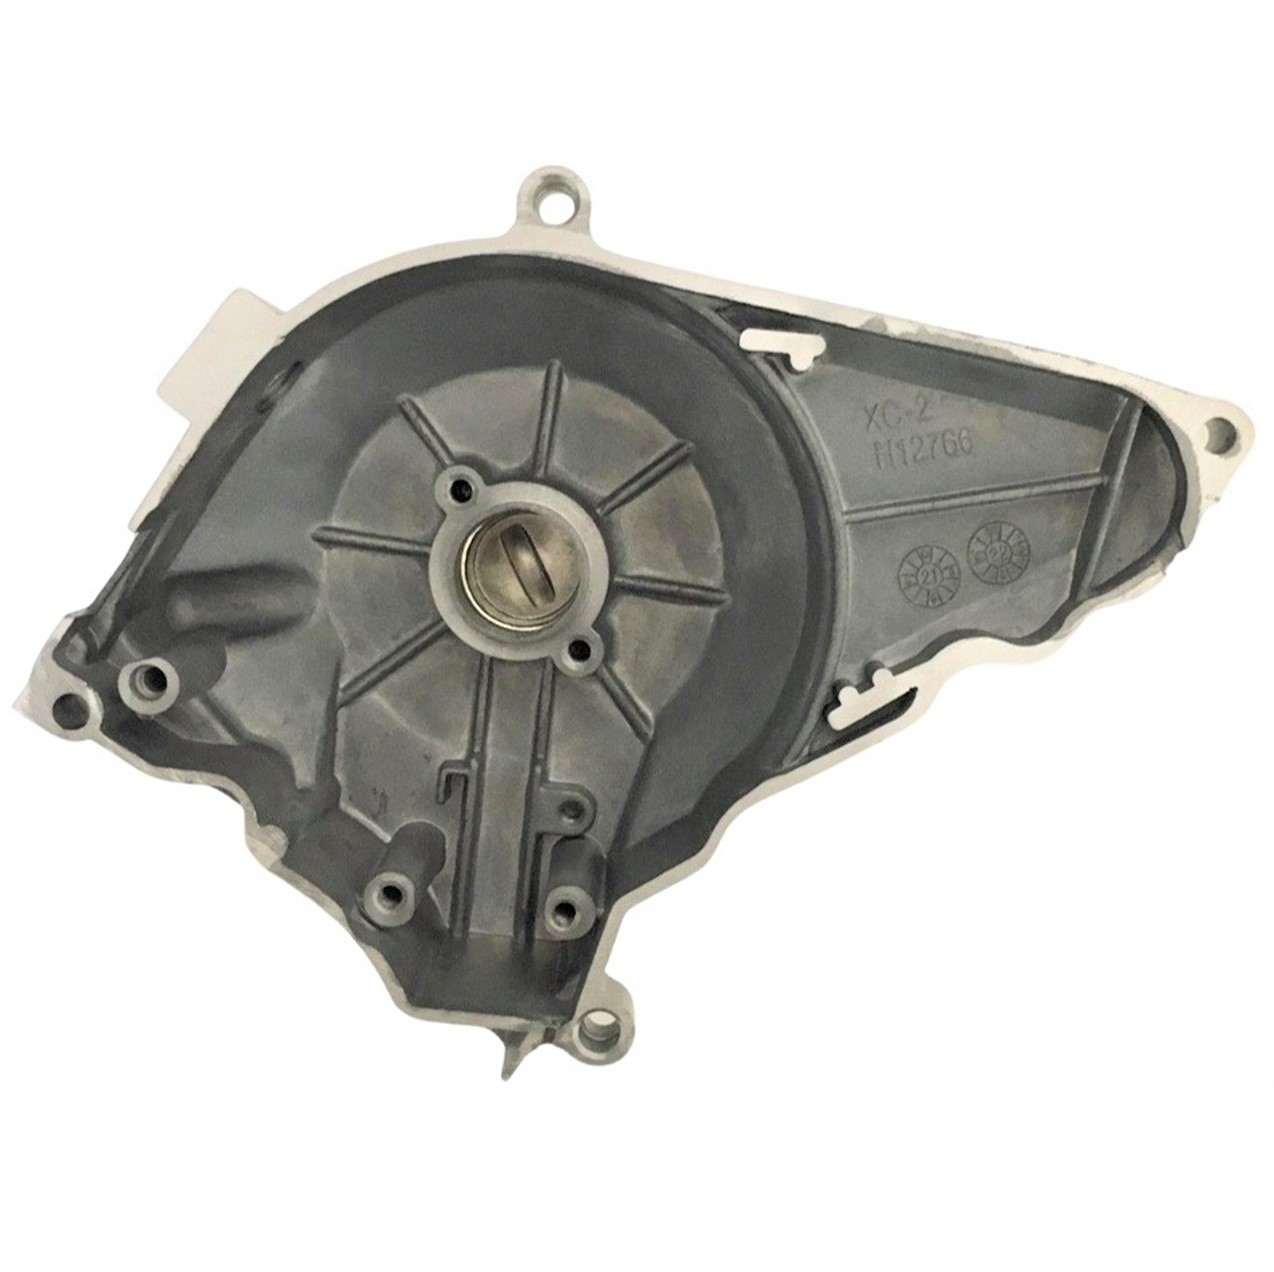 Stator Cover Fits 50-125cc Honda Copy ATV & DirtBikes with the bottom mount starter. - Click Image to Close